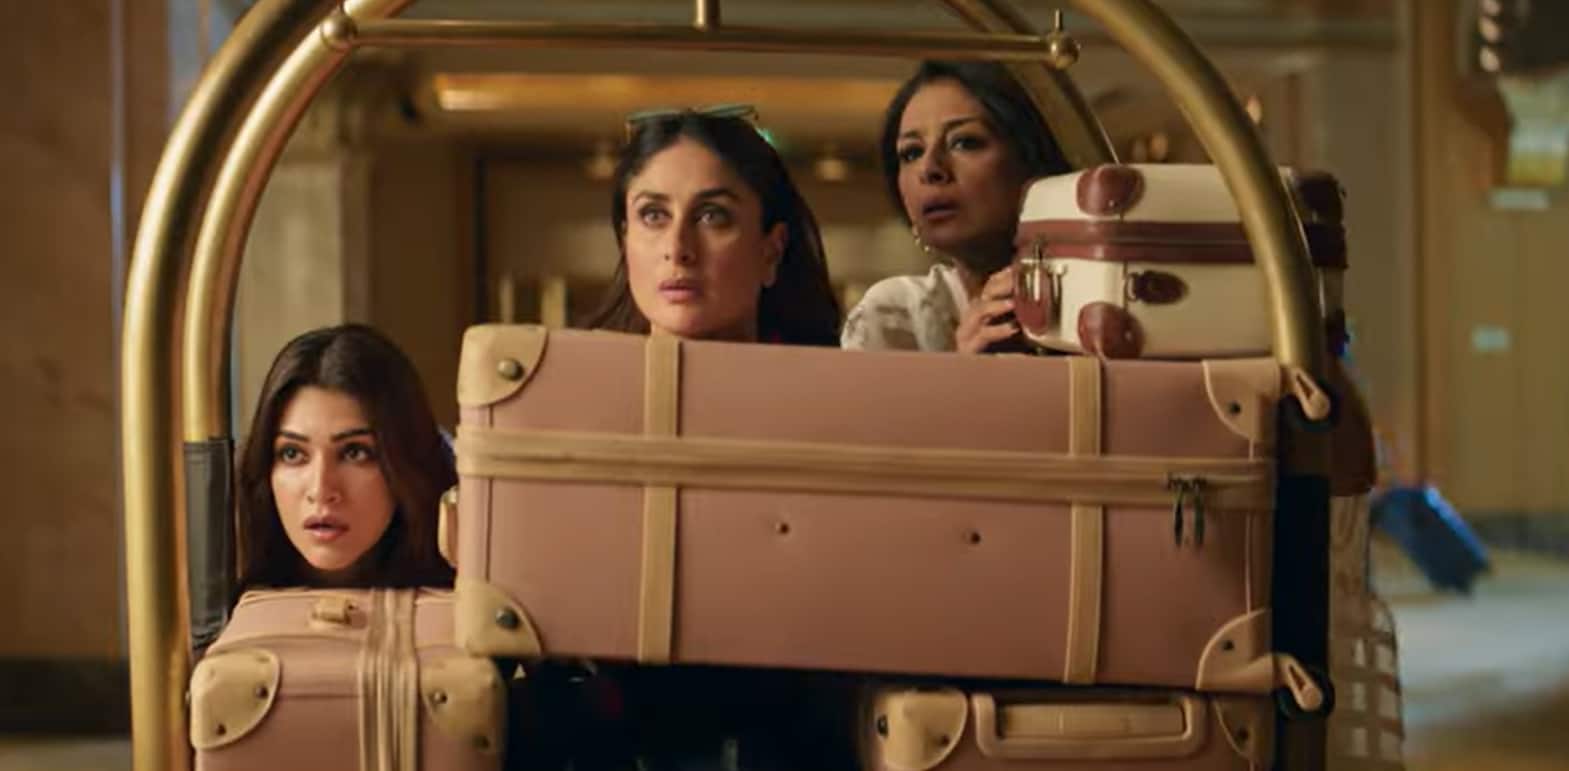 Crew Teaser Out: Get Ready For A Wild Ride With The Sassy Flight Attendants Tabu, Kareena Kapoor And Kriti Sanon 